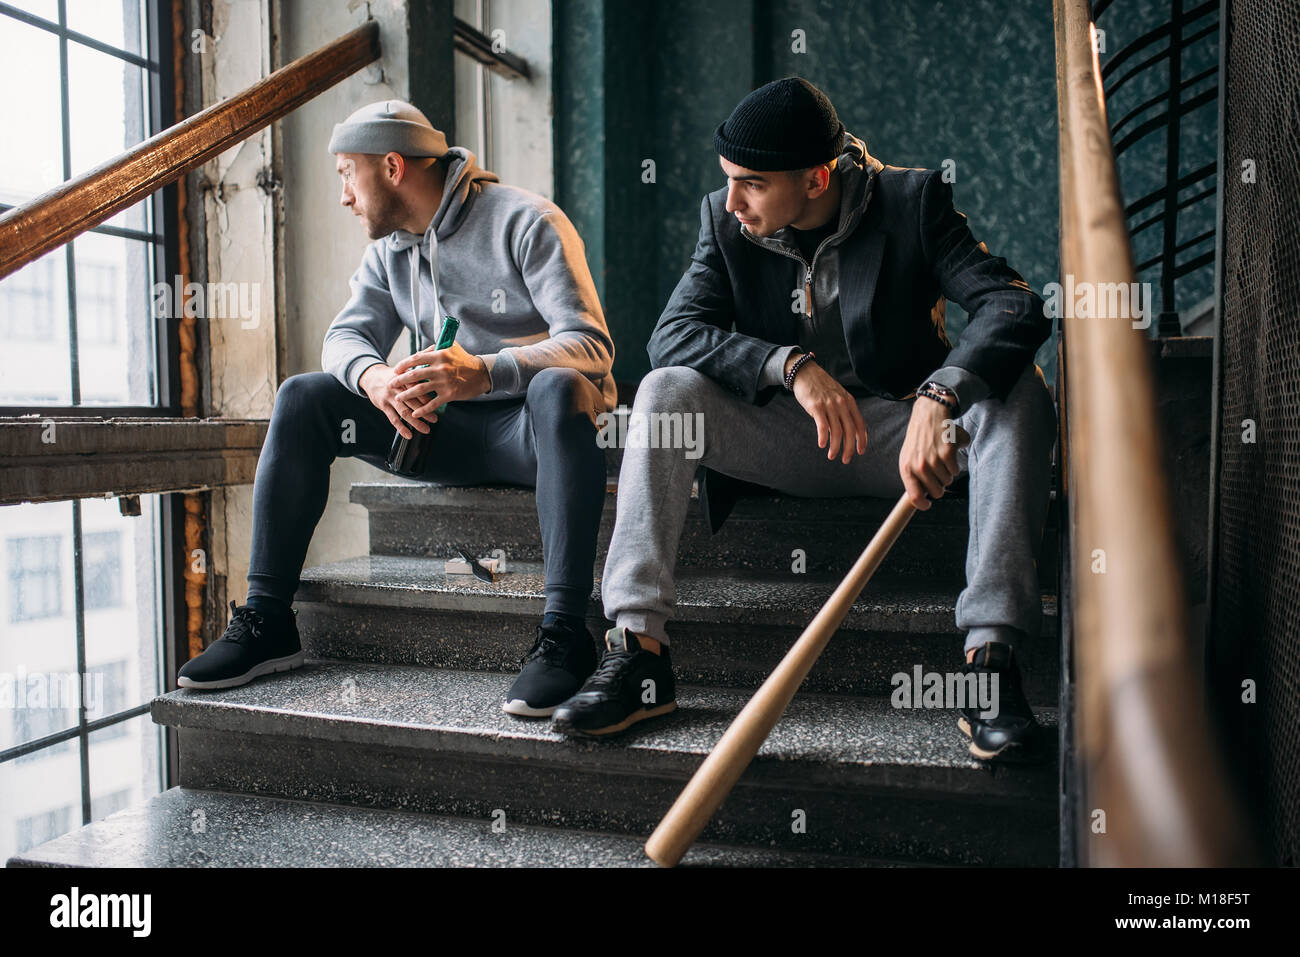 Page 3 - Hooligan And Bat High Resolution Stock Photography and Images -  Alamy